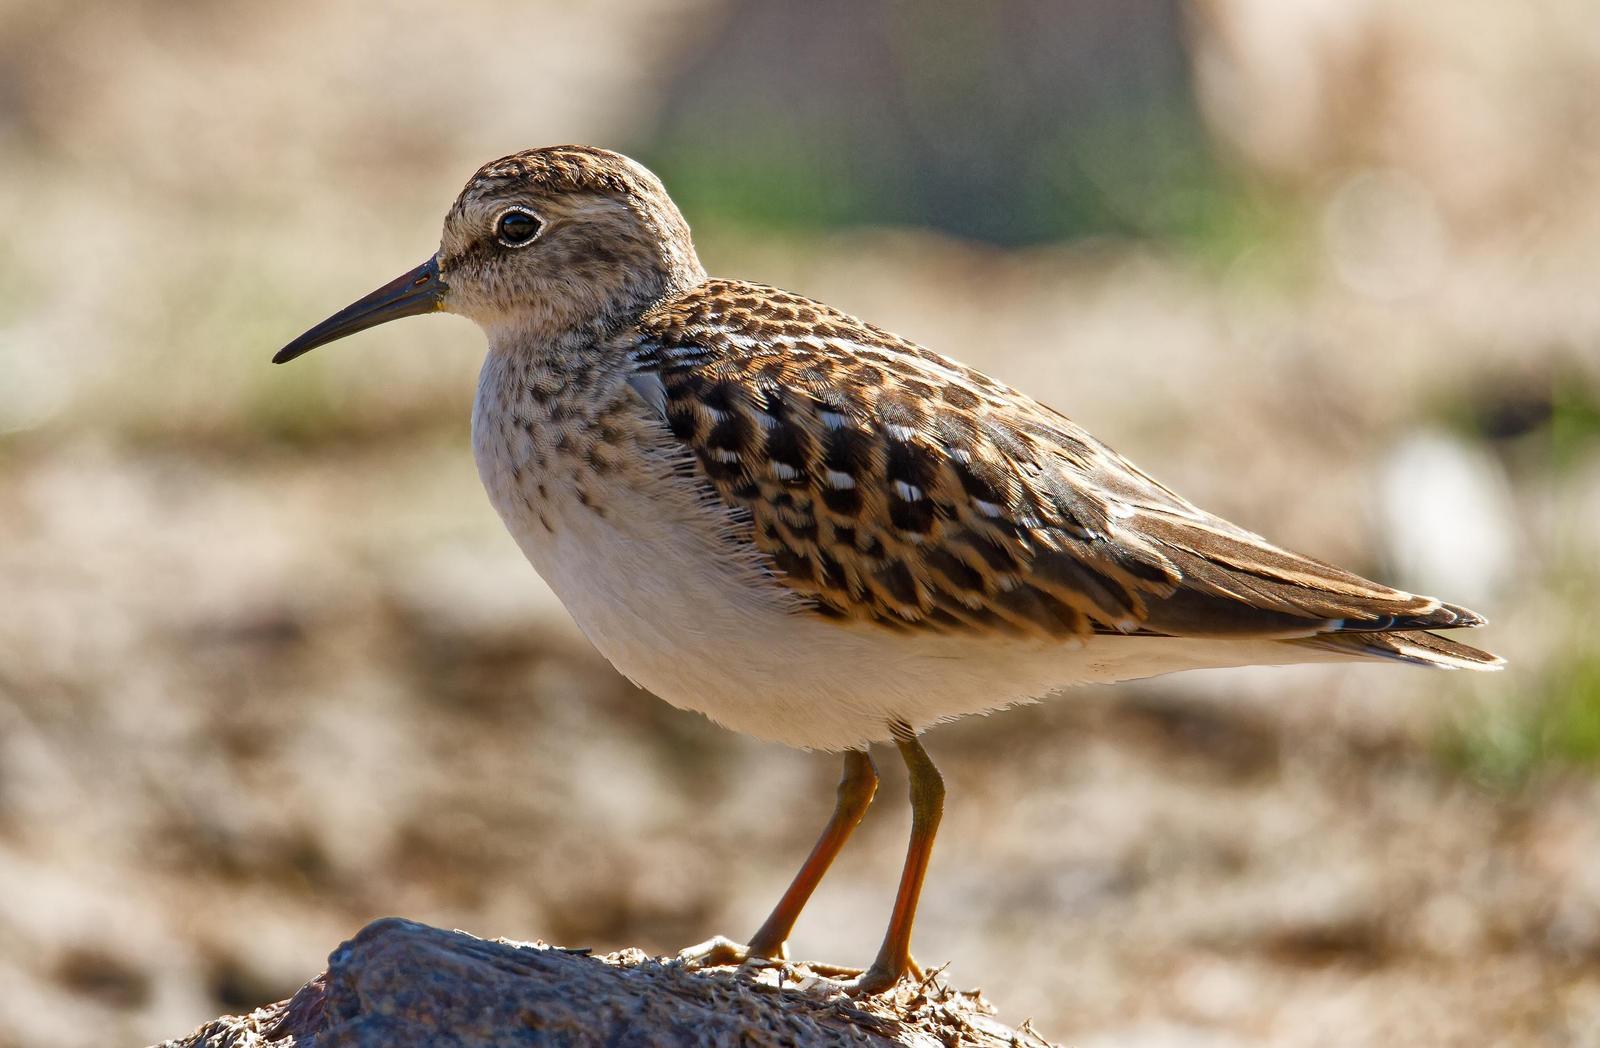 Least Sandpiper Photo by Nick Guirate